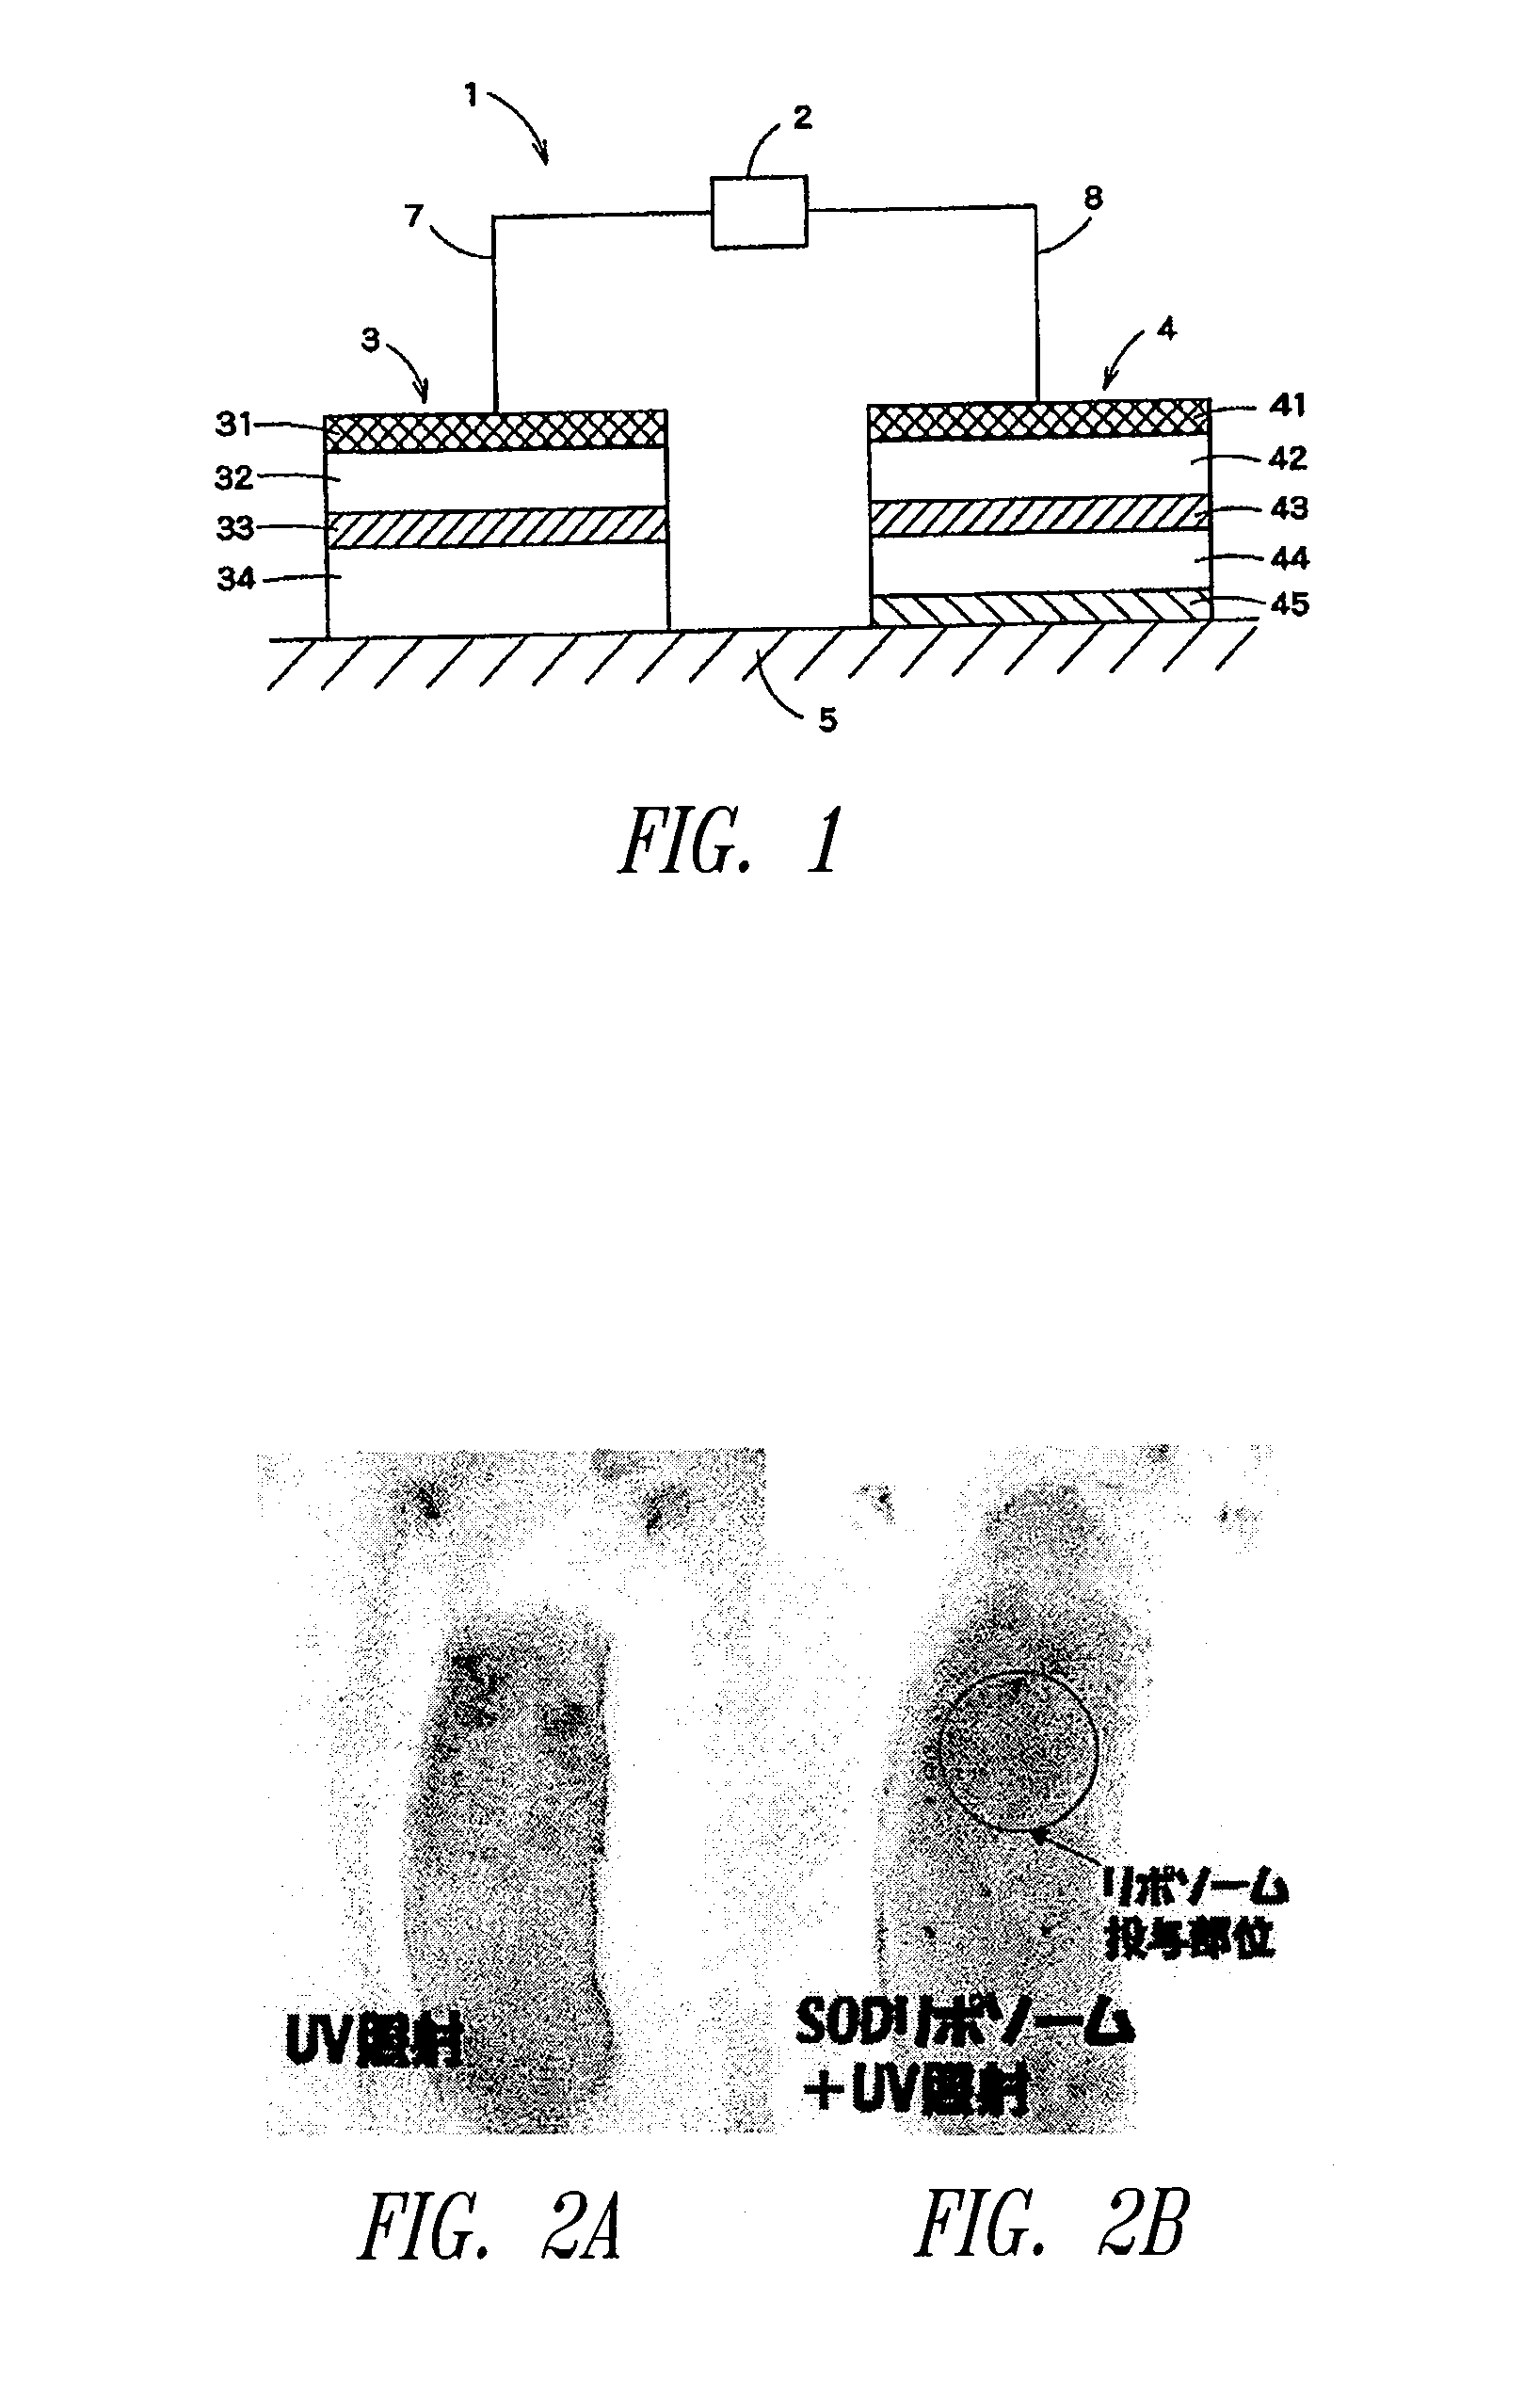 System, devices, and methods for iontophoretic delivery of compositions including antioxidants encapsulated in liposomes